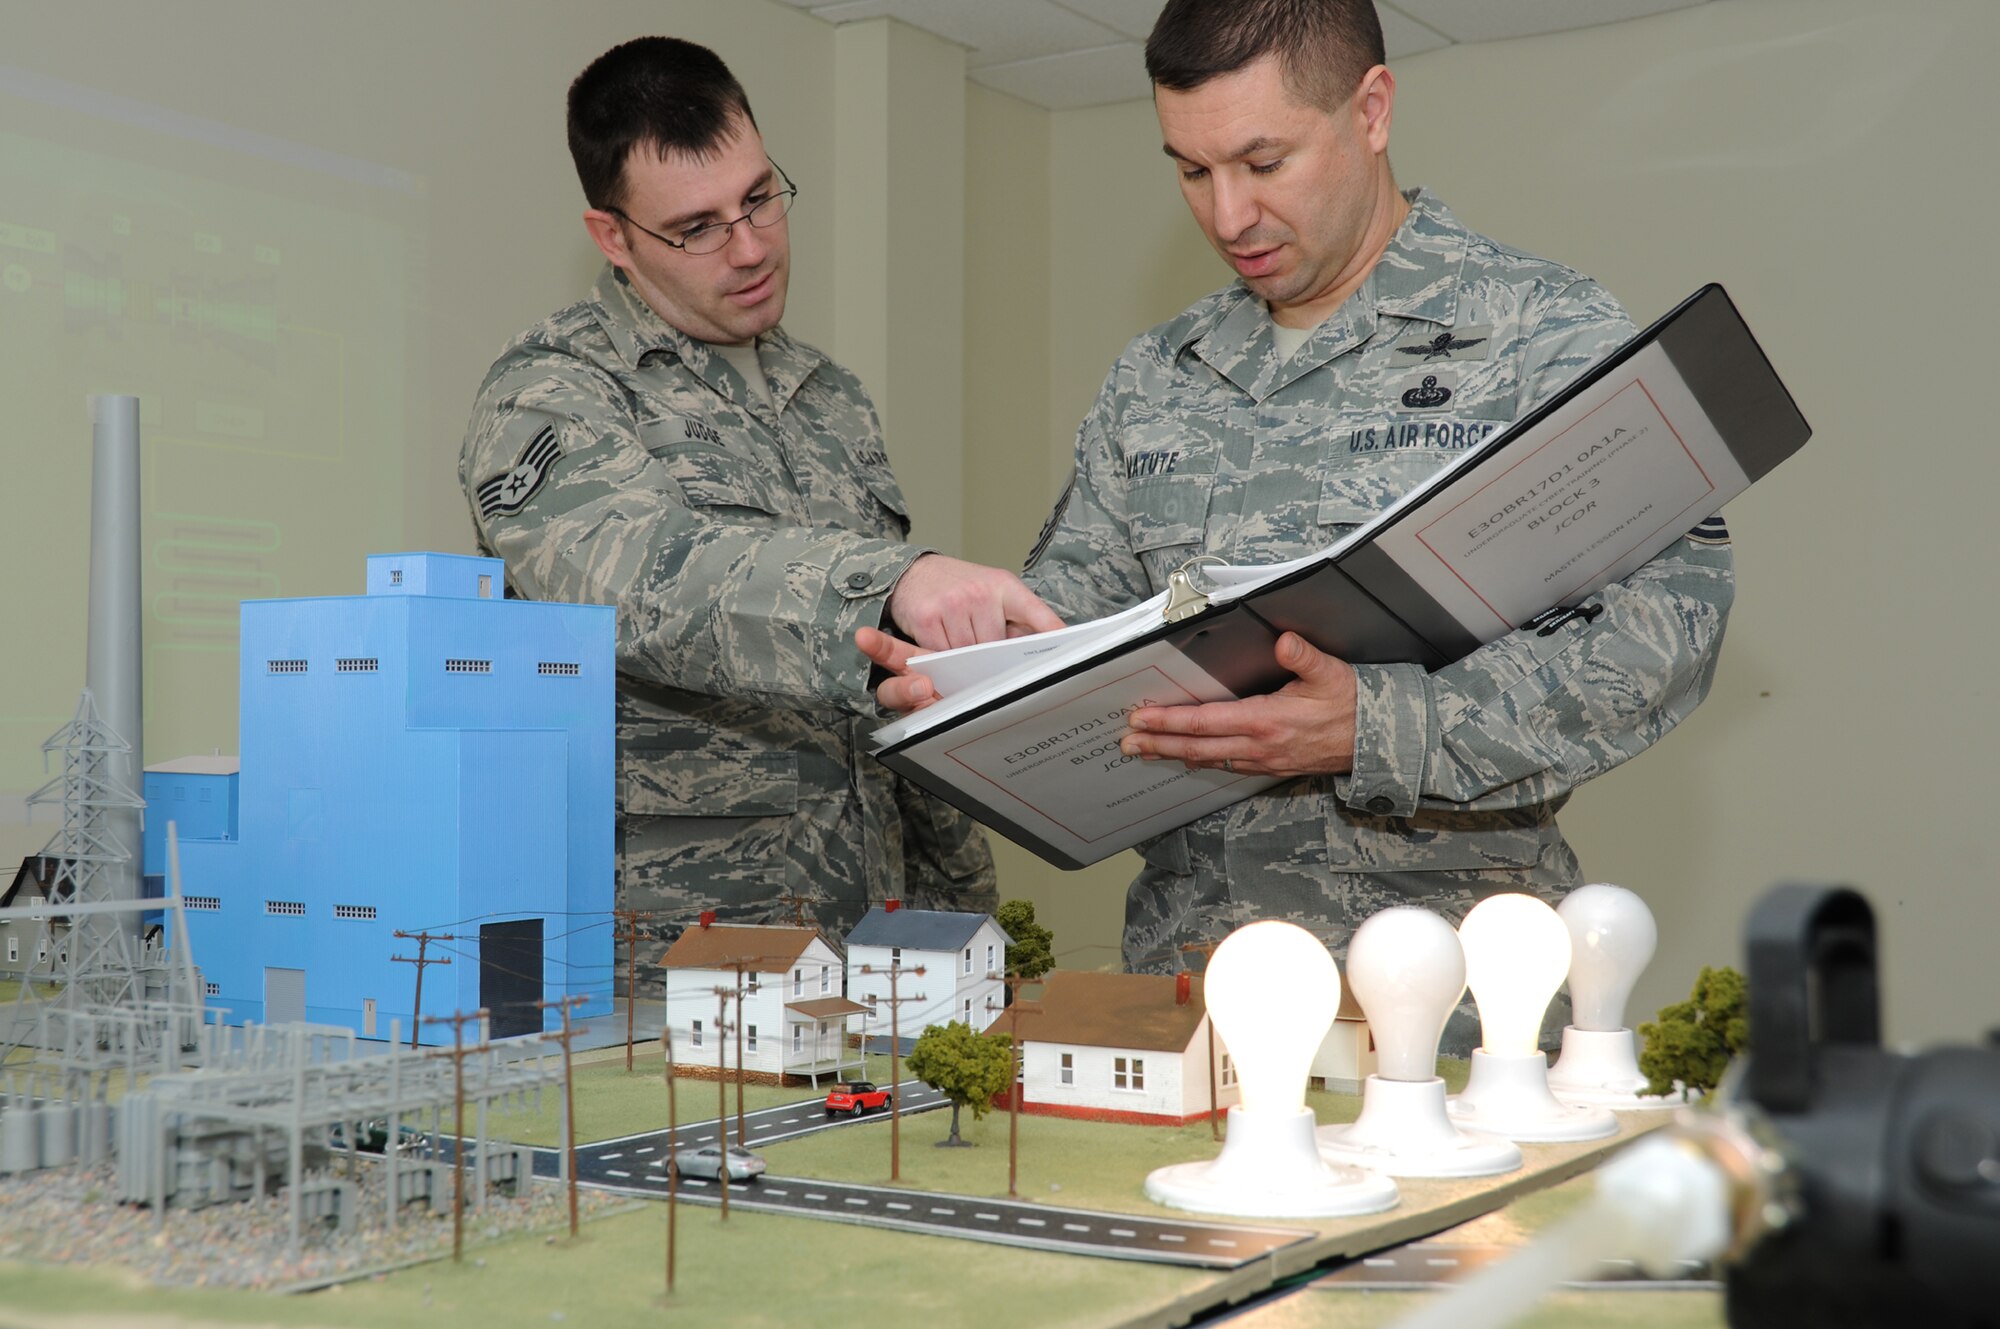 Sergeant Judge, left, and Sergeant Matute do a final equipment check on the industrial control systems equipment to ensure results of their first ICS exercise were correct.  (U.S. Air Force photo by Kemberly Groue)